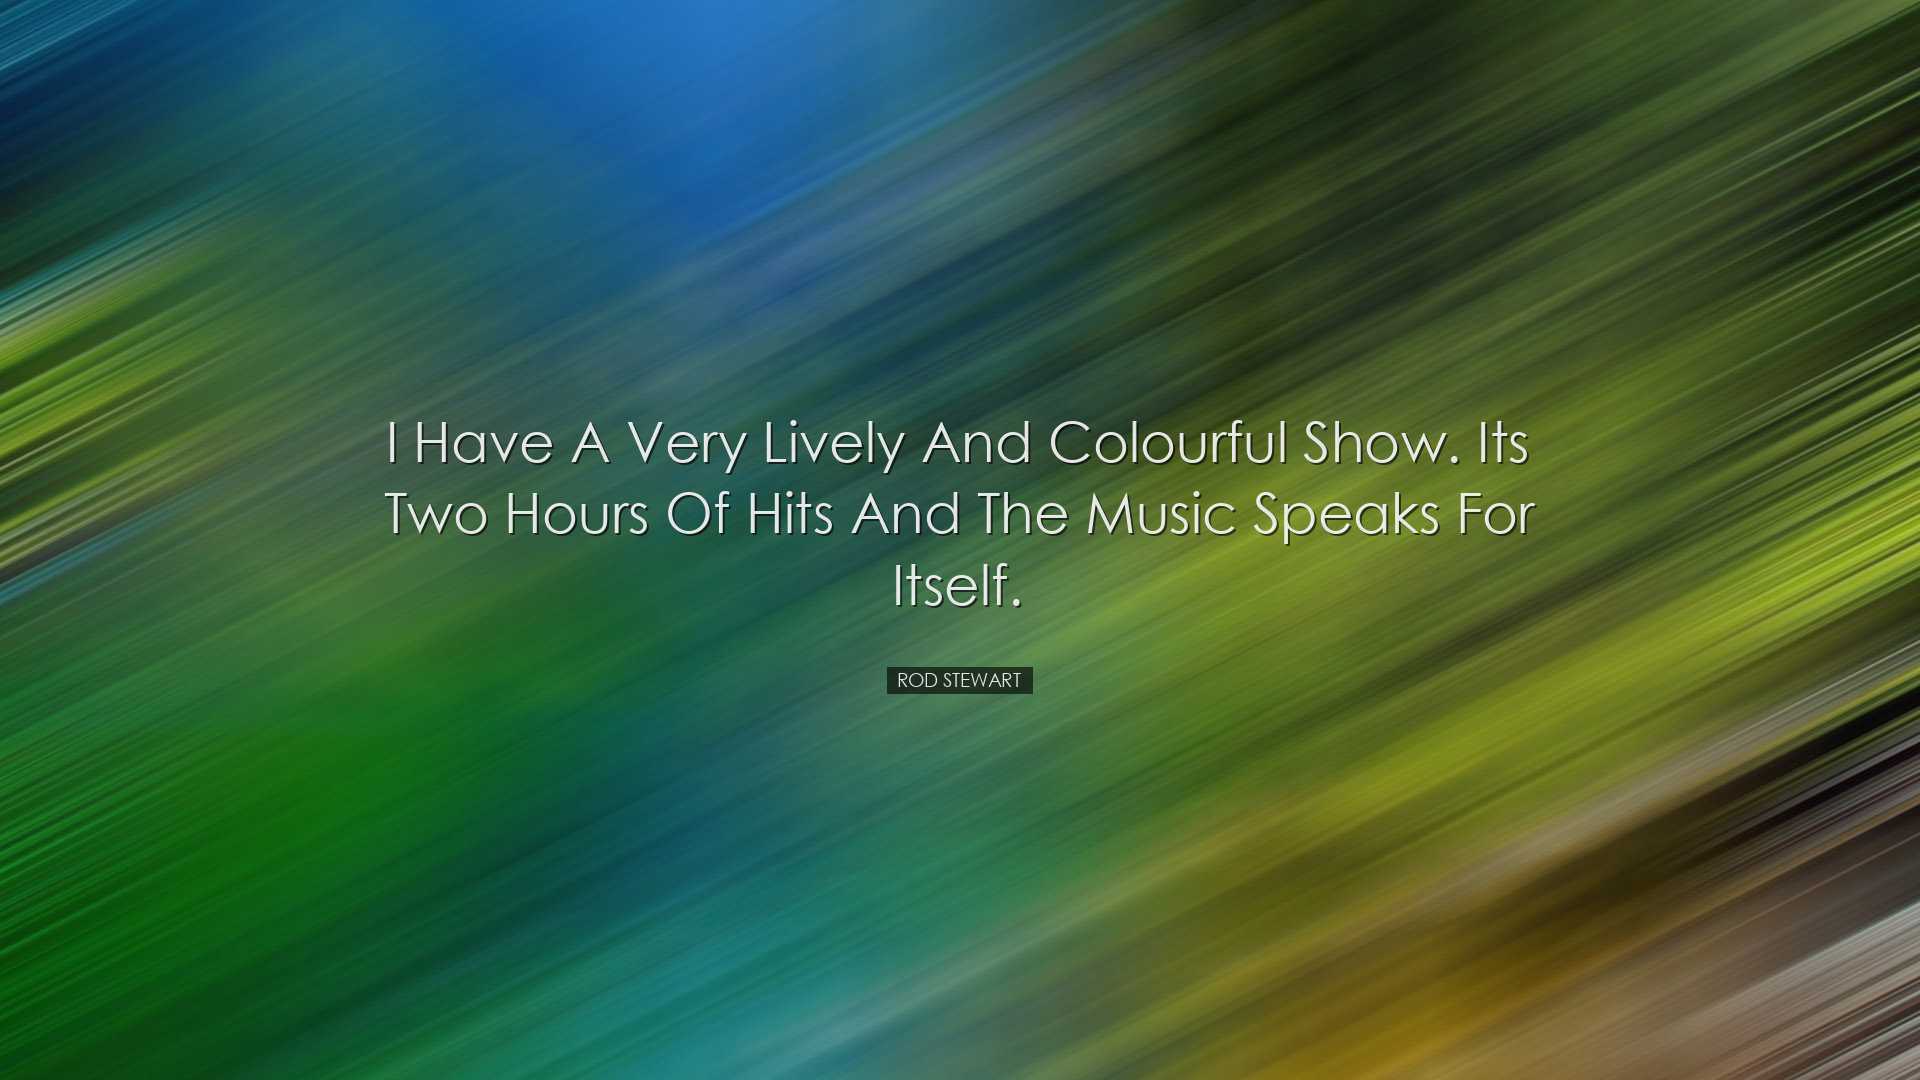 I have a very lively and colourful show. Its two hours of hits and